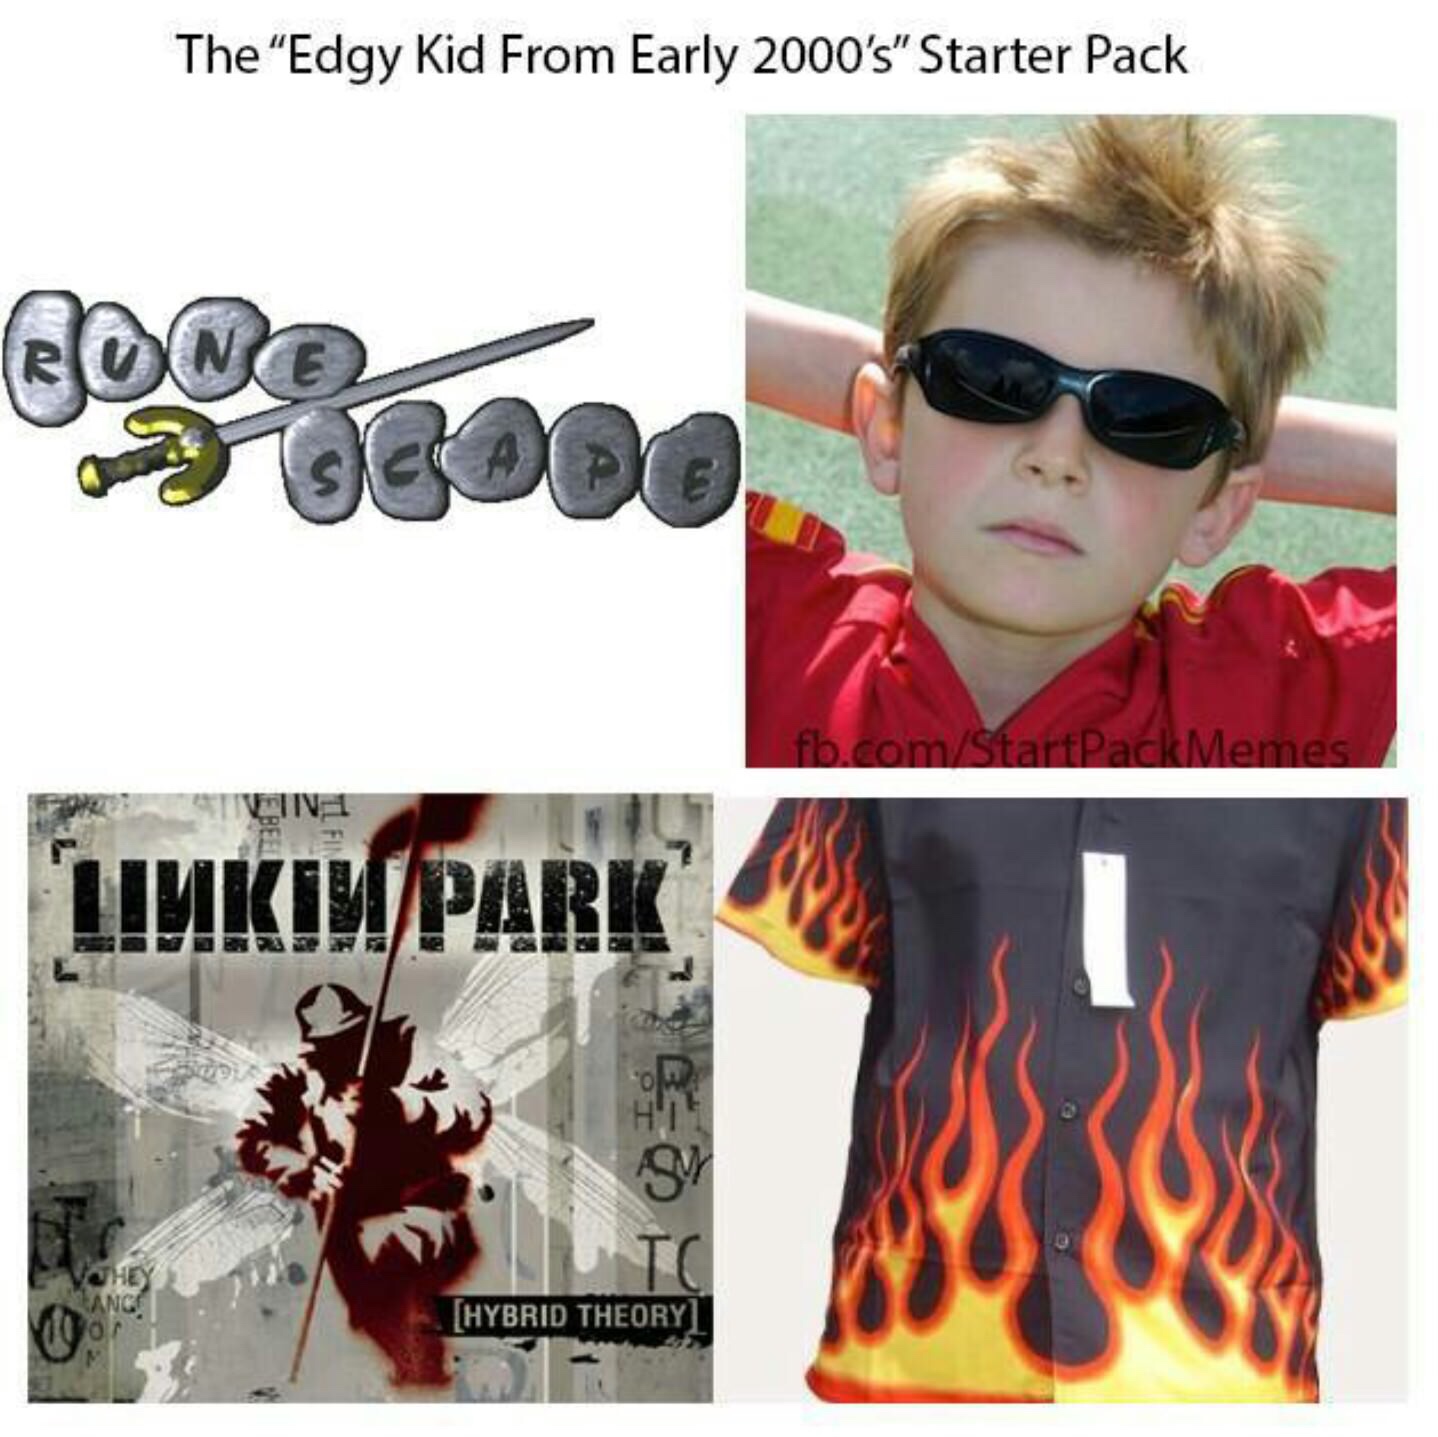 edgy kids - The Edgy Kid From Early 2000's" Starter Pack en Cado fb.comStartPack Memes Tvena Limkilpark Hybrid Theory